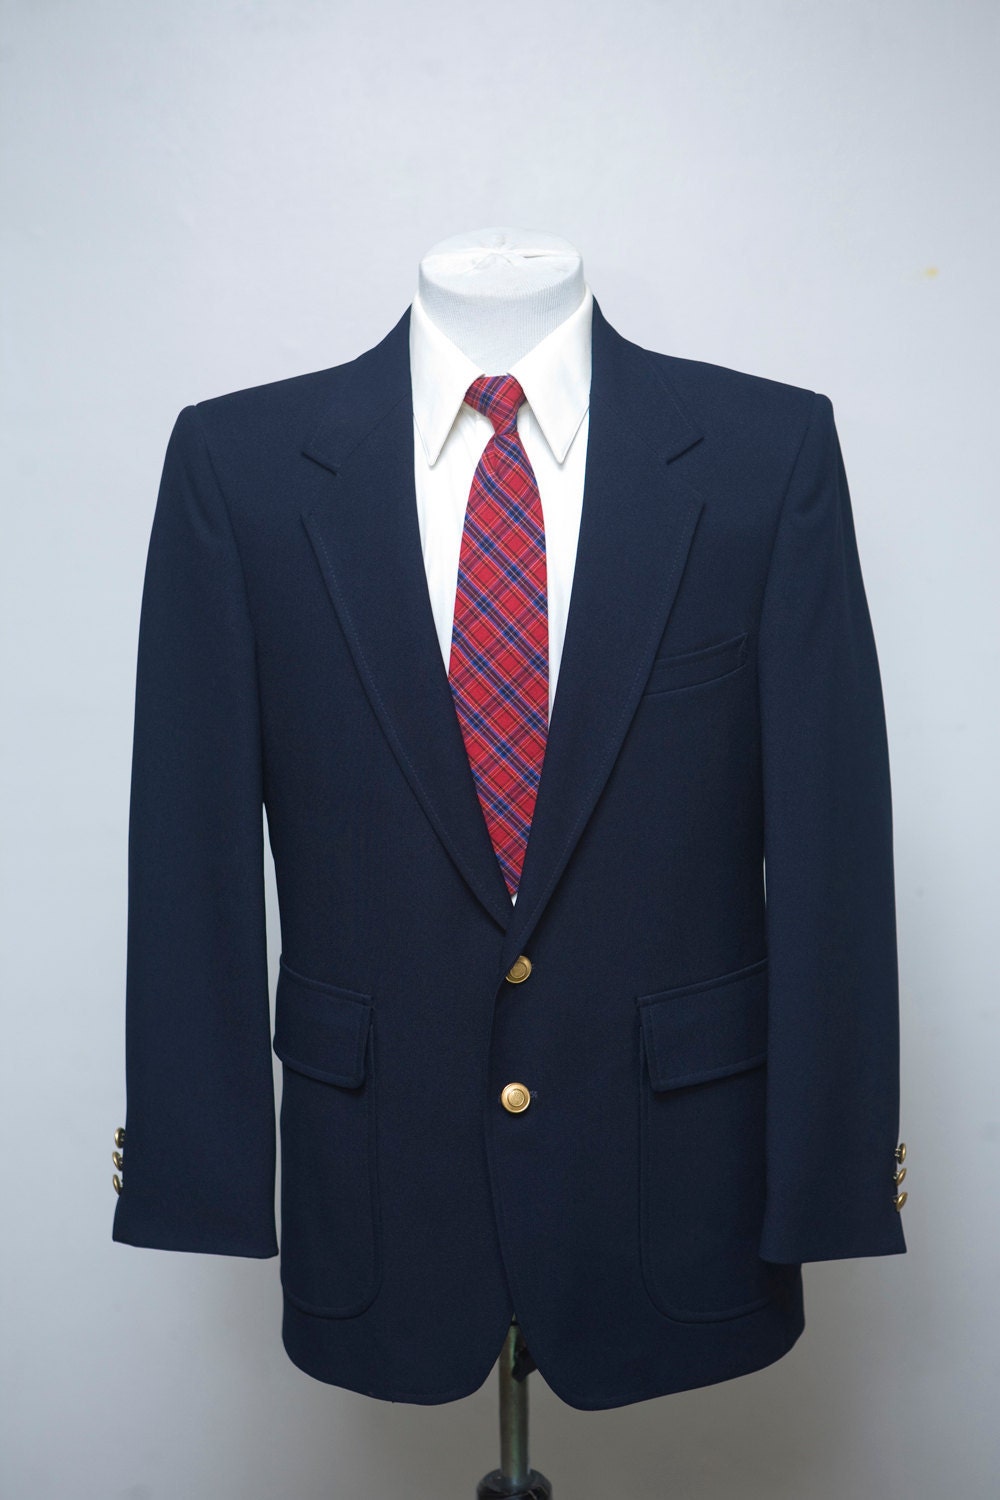 Men's Suit / Vintage Navy Blue Jacket and Trousers / Size - Etsy